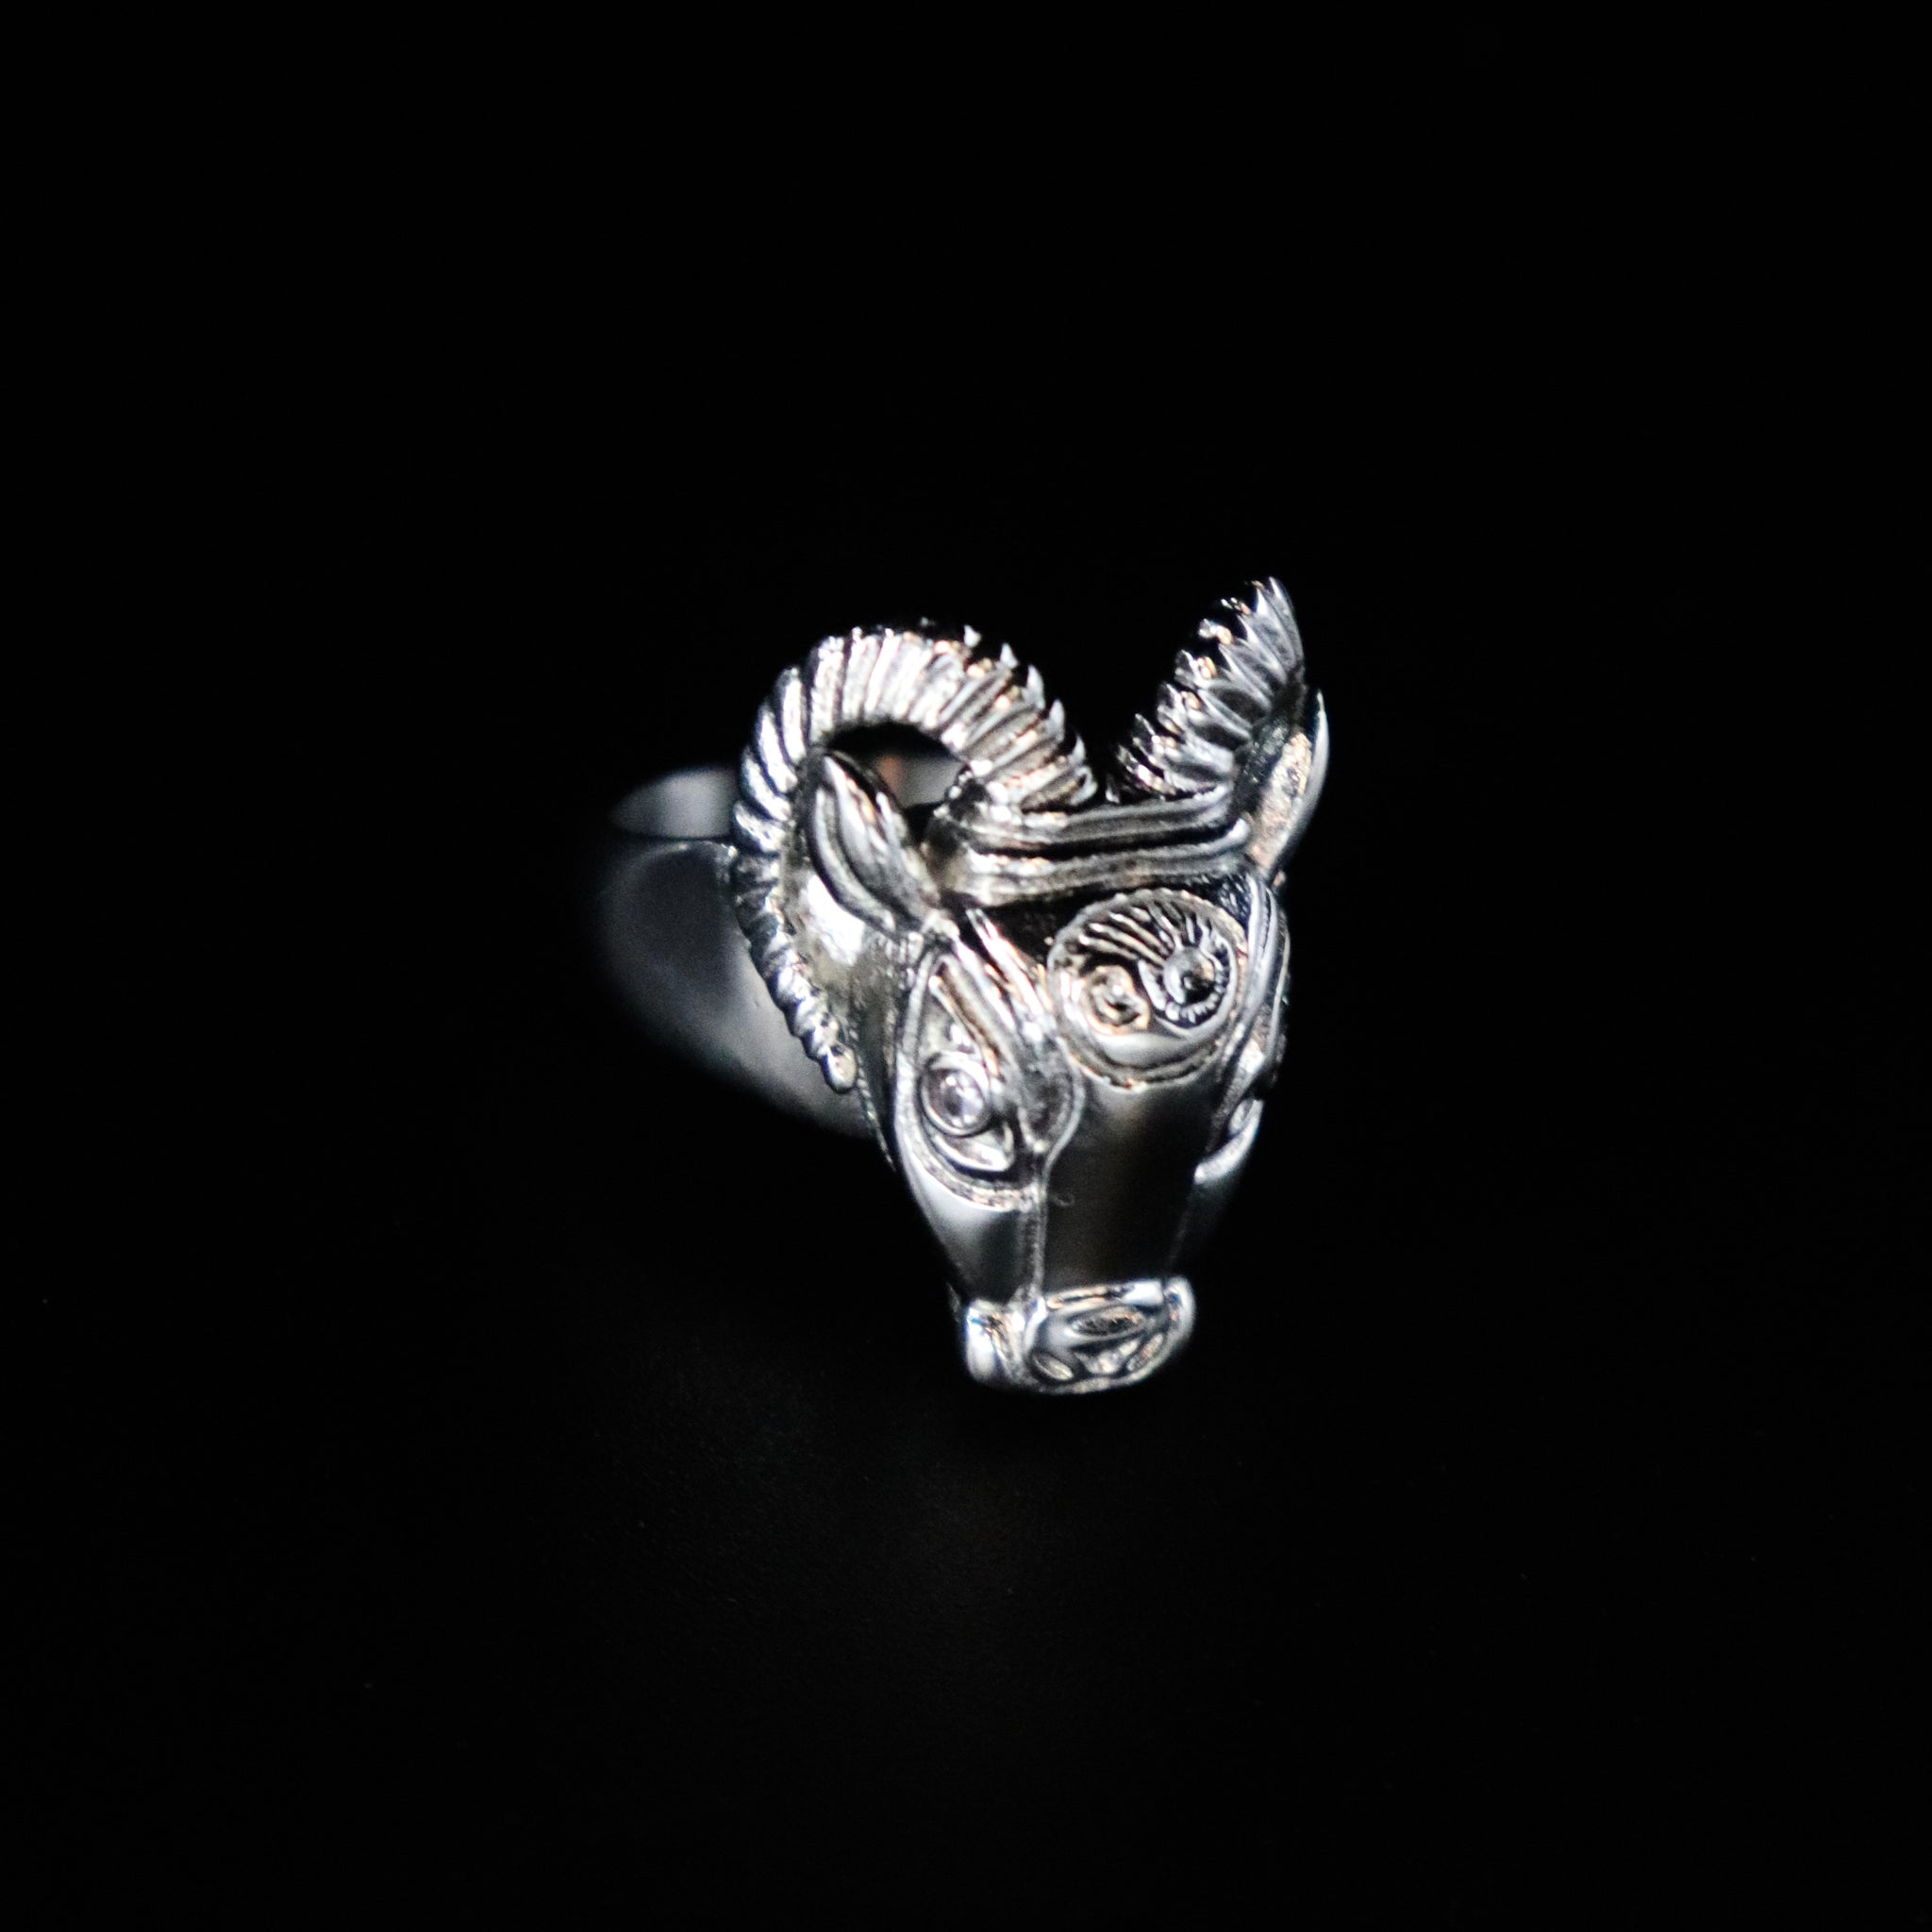 Aries Ring - Fashion Jewelry by Yordy.